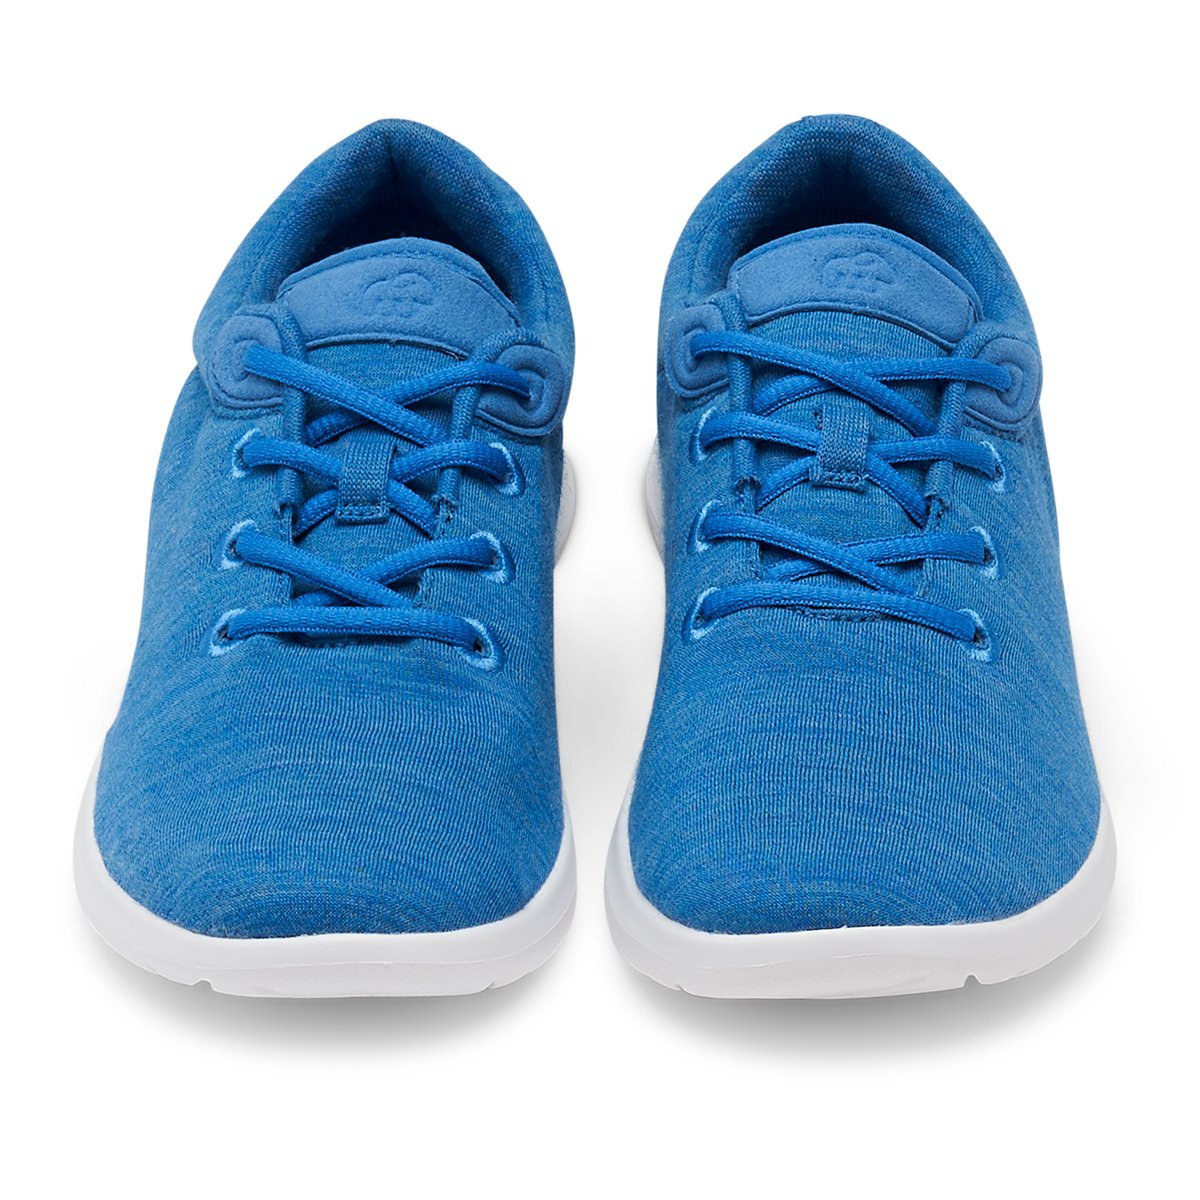 Men's Lace-Ups Bright Blue - Special Offer